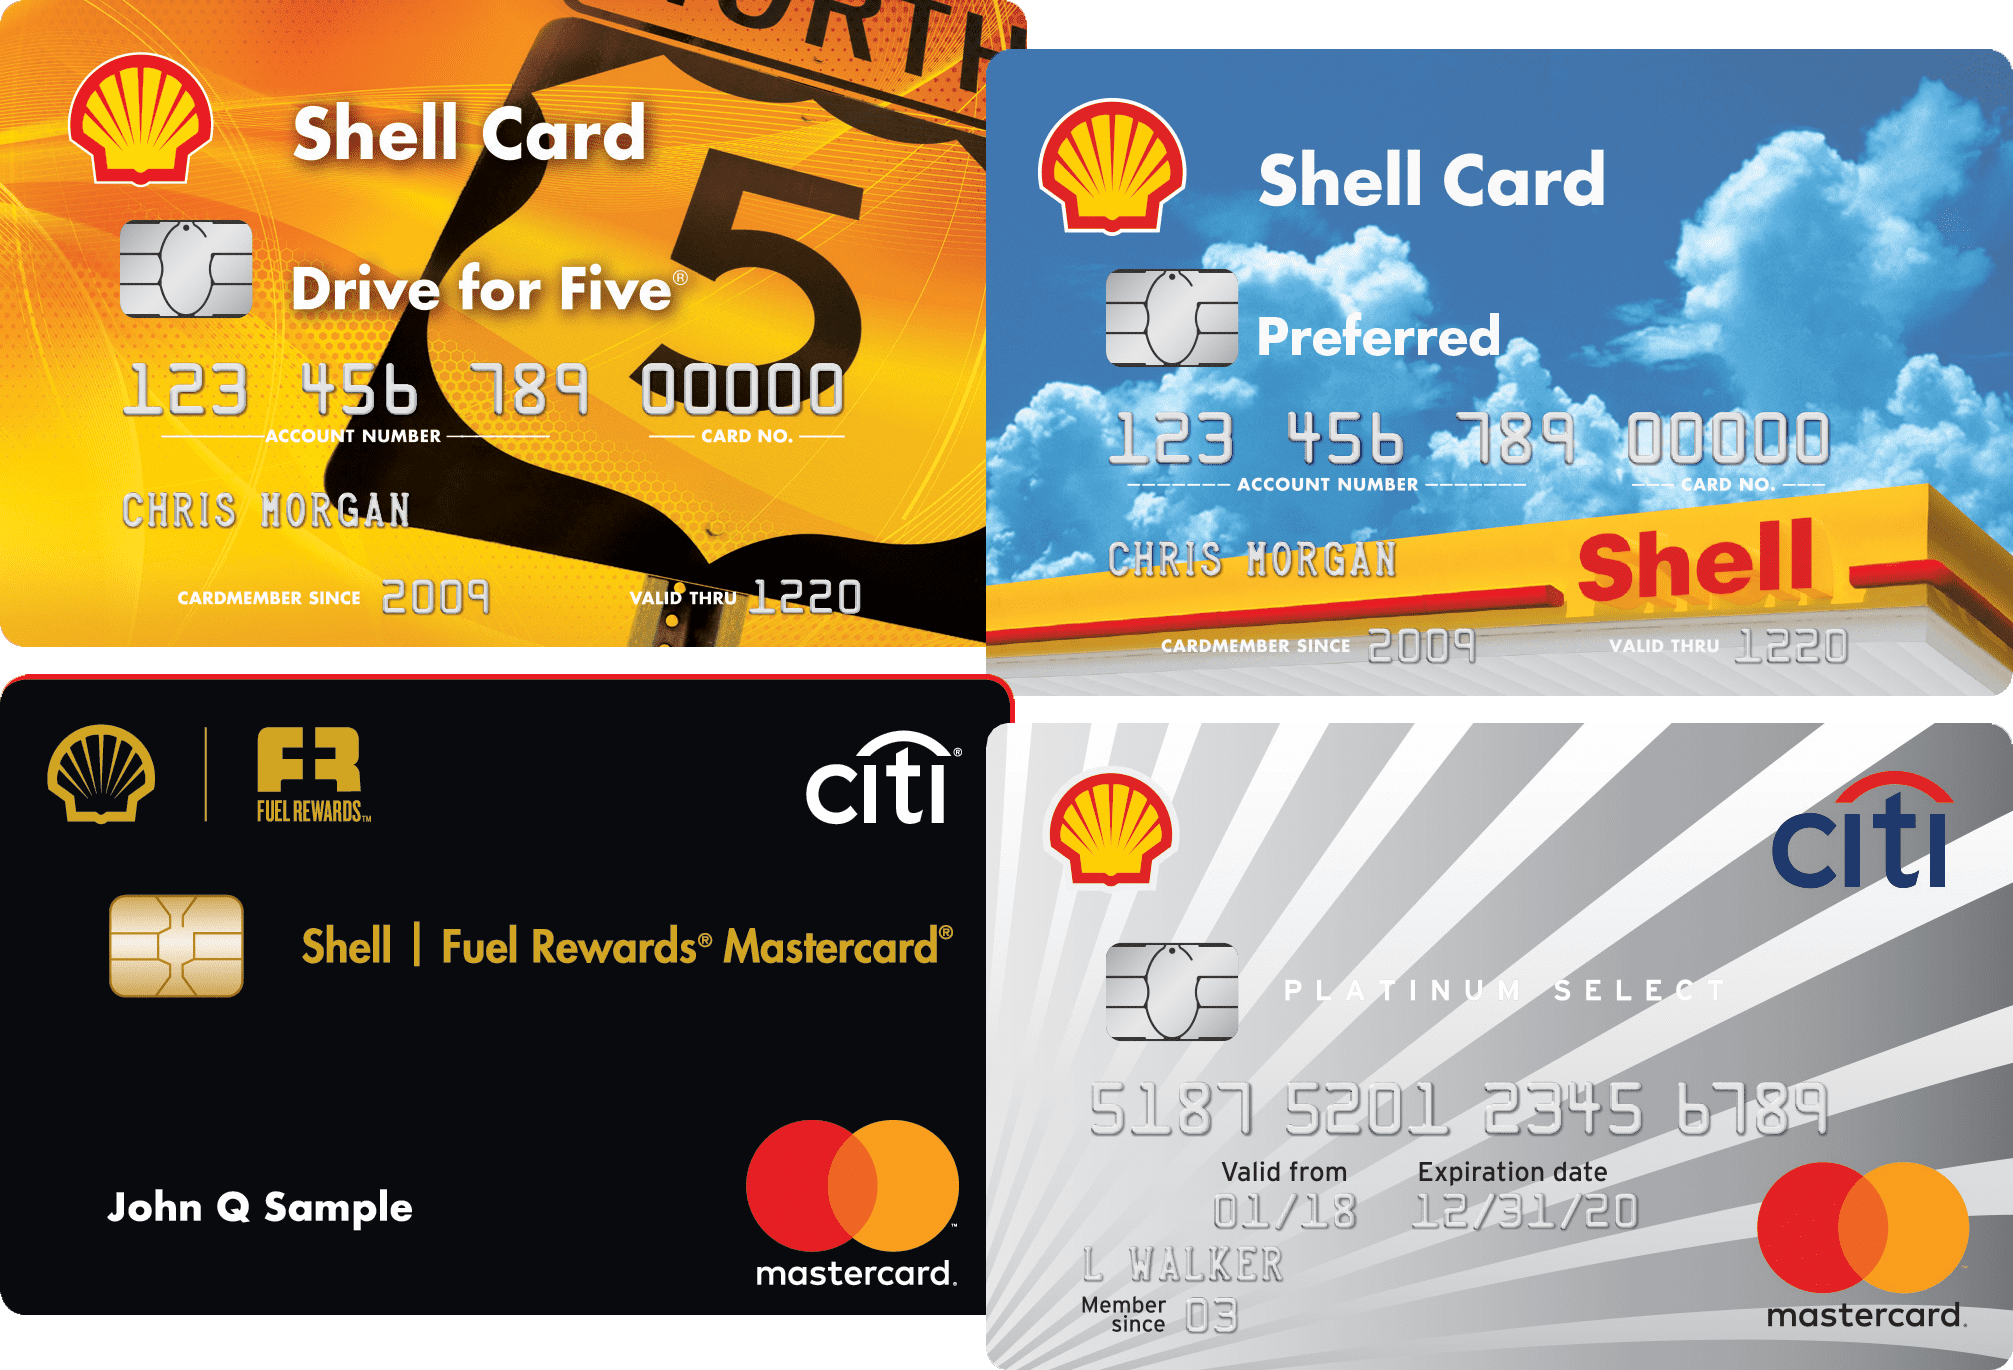 Link your Shell Card to your Account